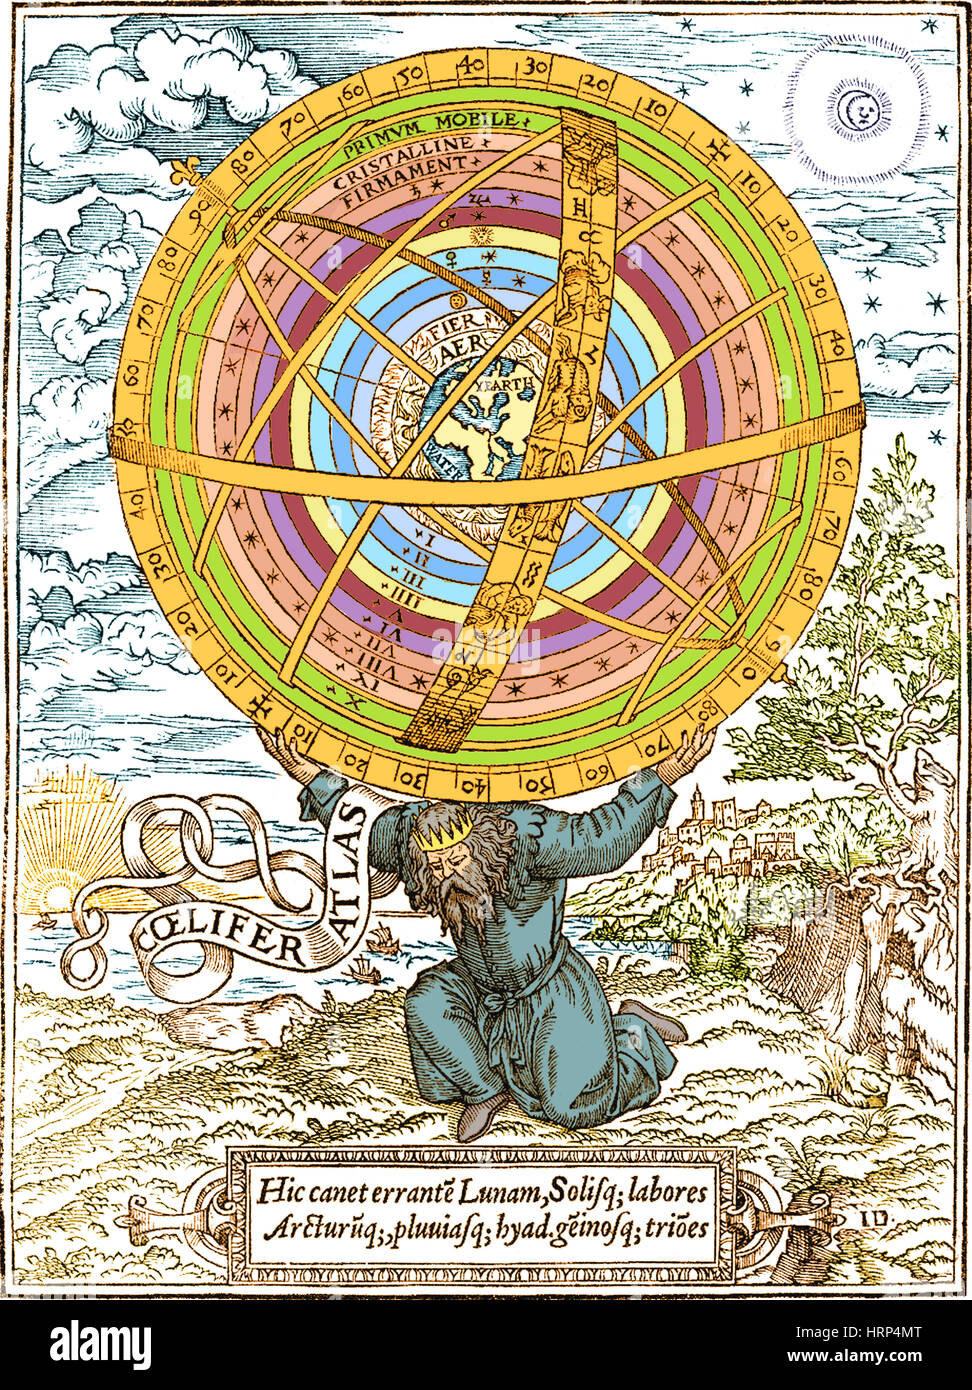 Ptolemaic System, Geocentric Model, 1531 Stock Photo